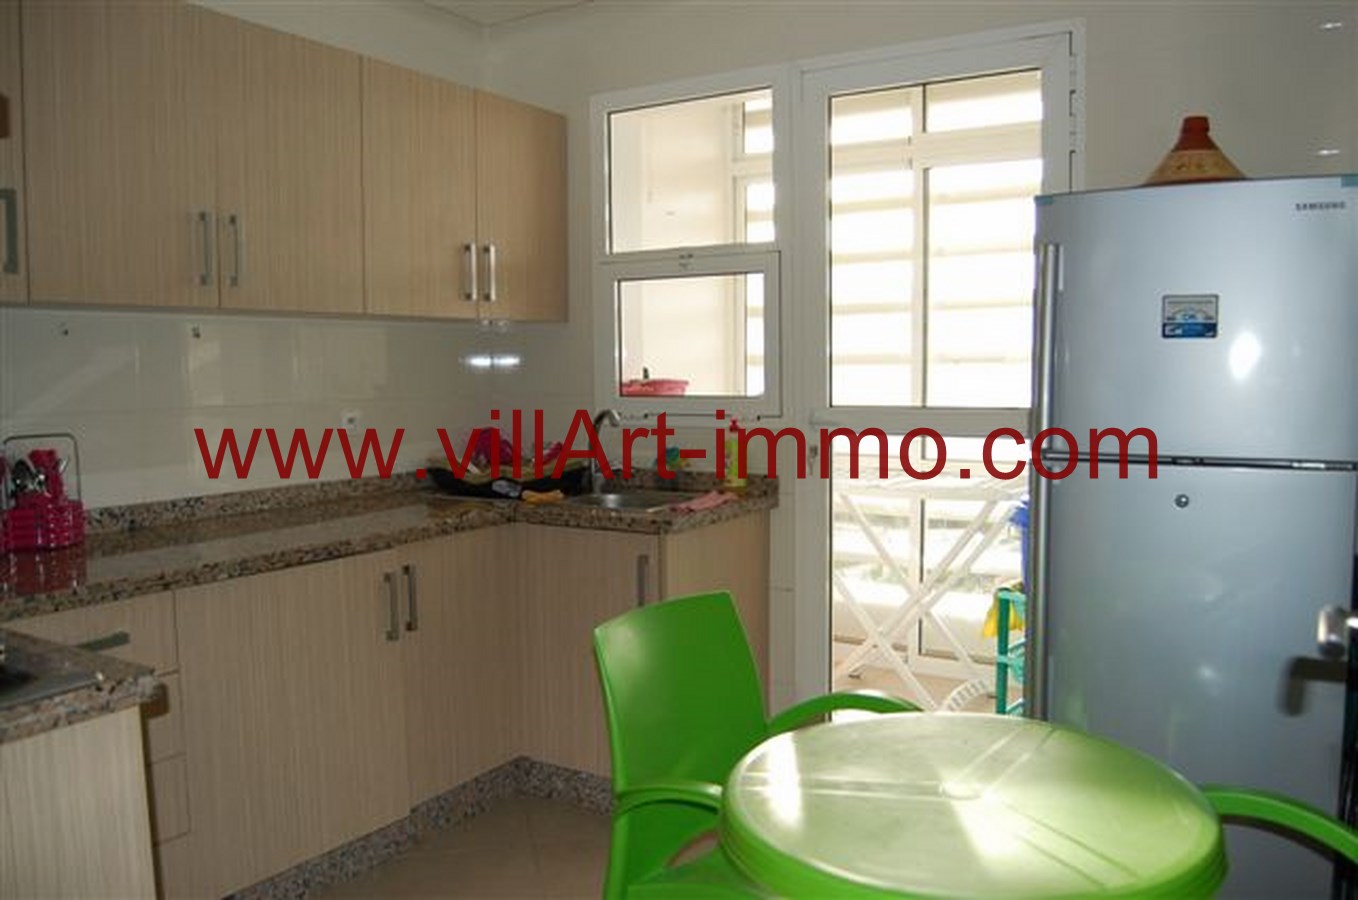 4-location-appartement-meuble-lotinord-tanger-cuisine-l836-villart-immo